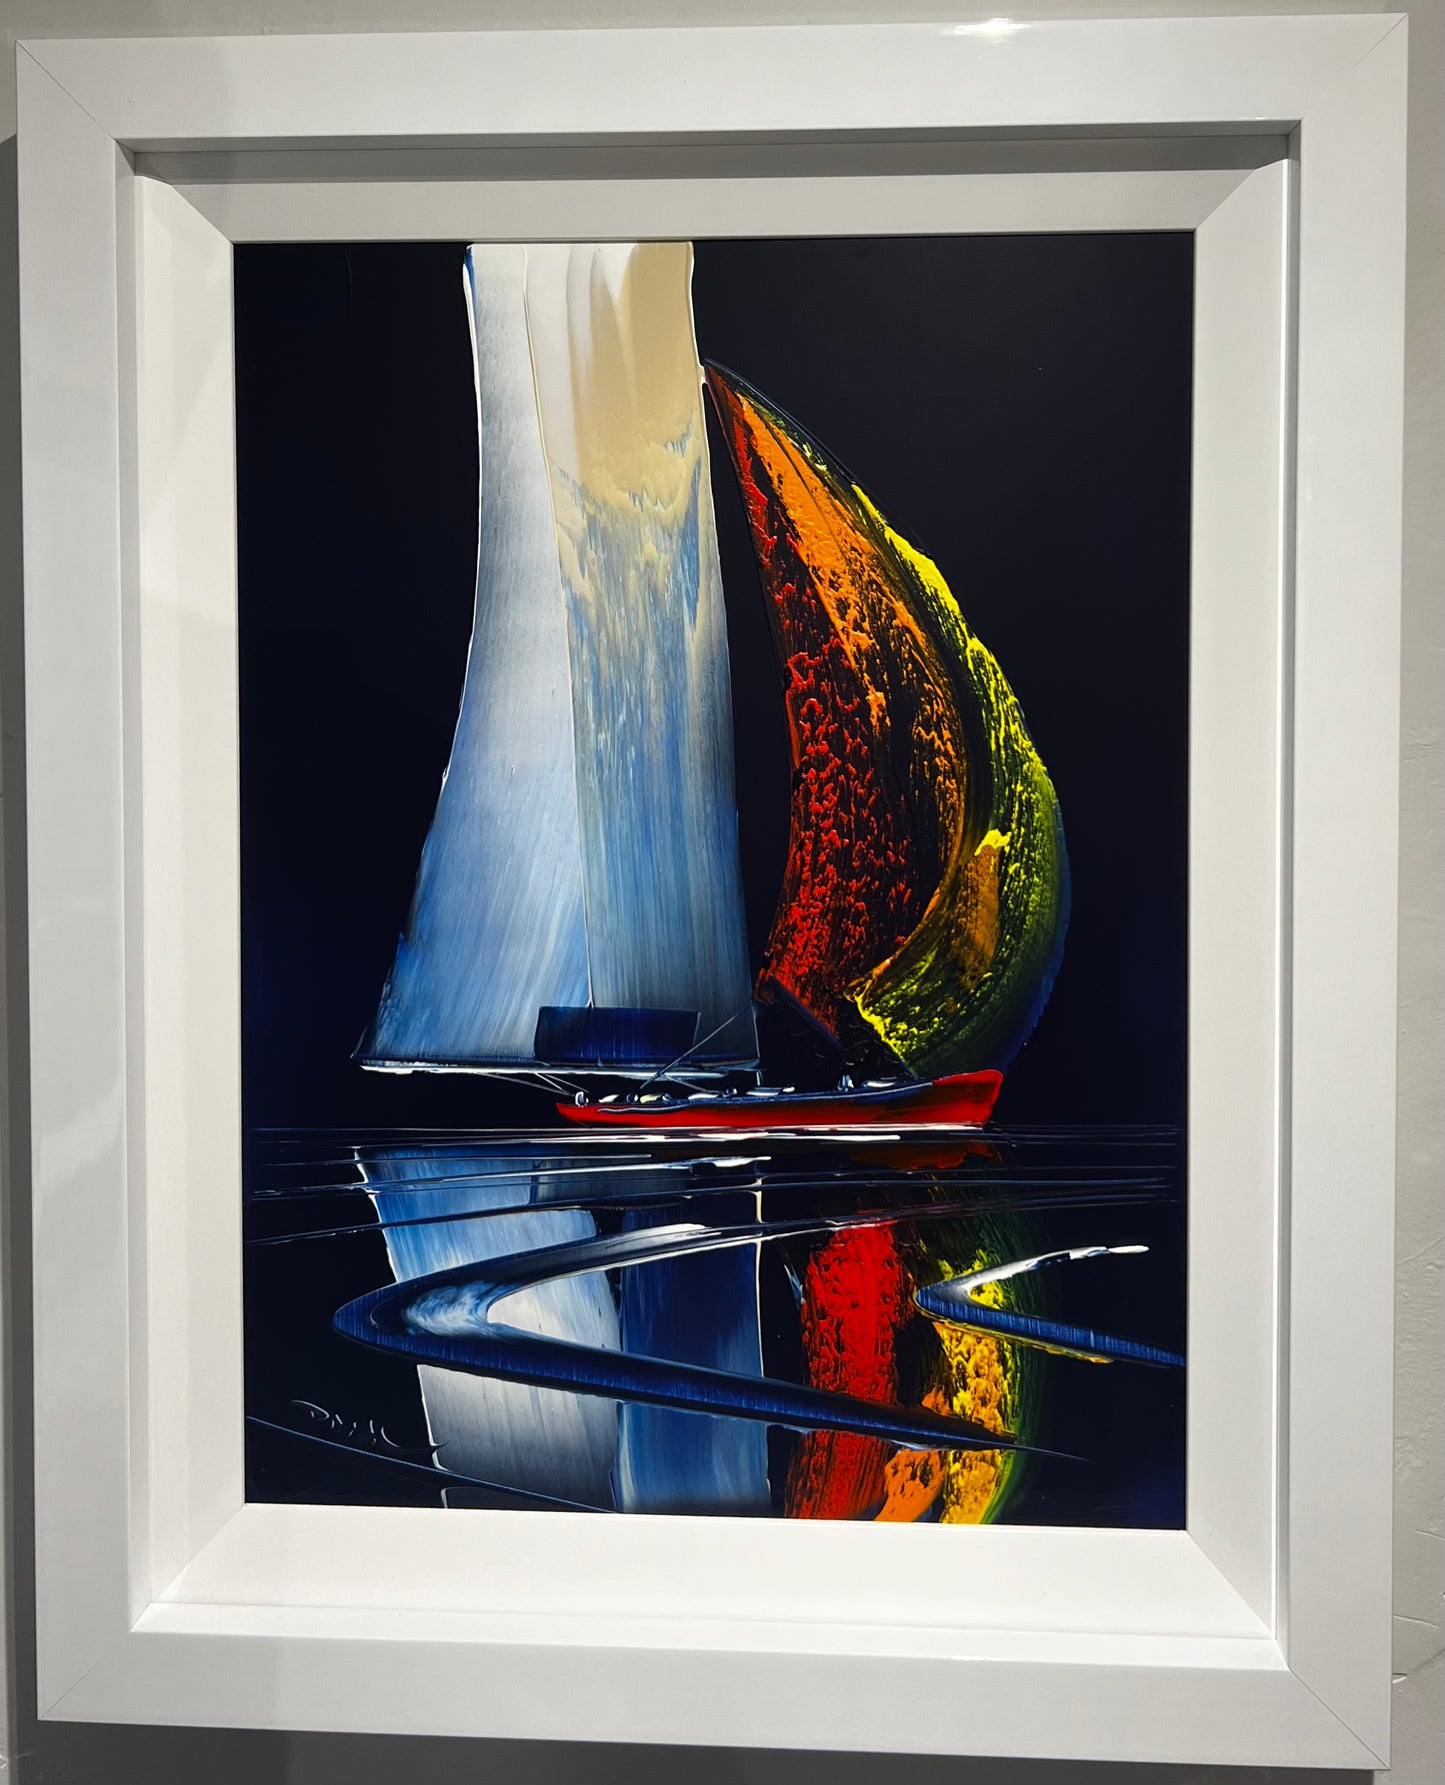 Colourful Sails III by Duncan MacGregor